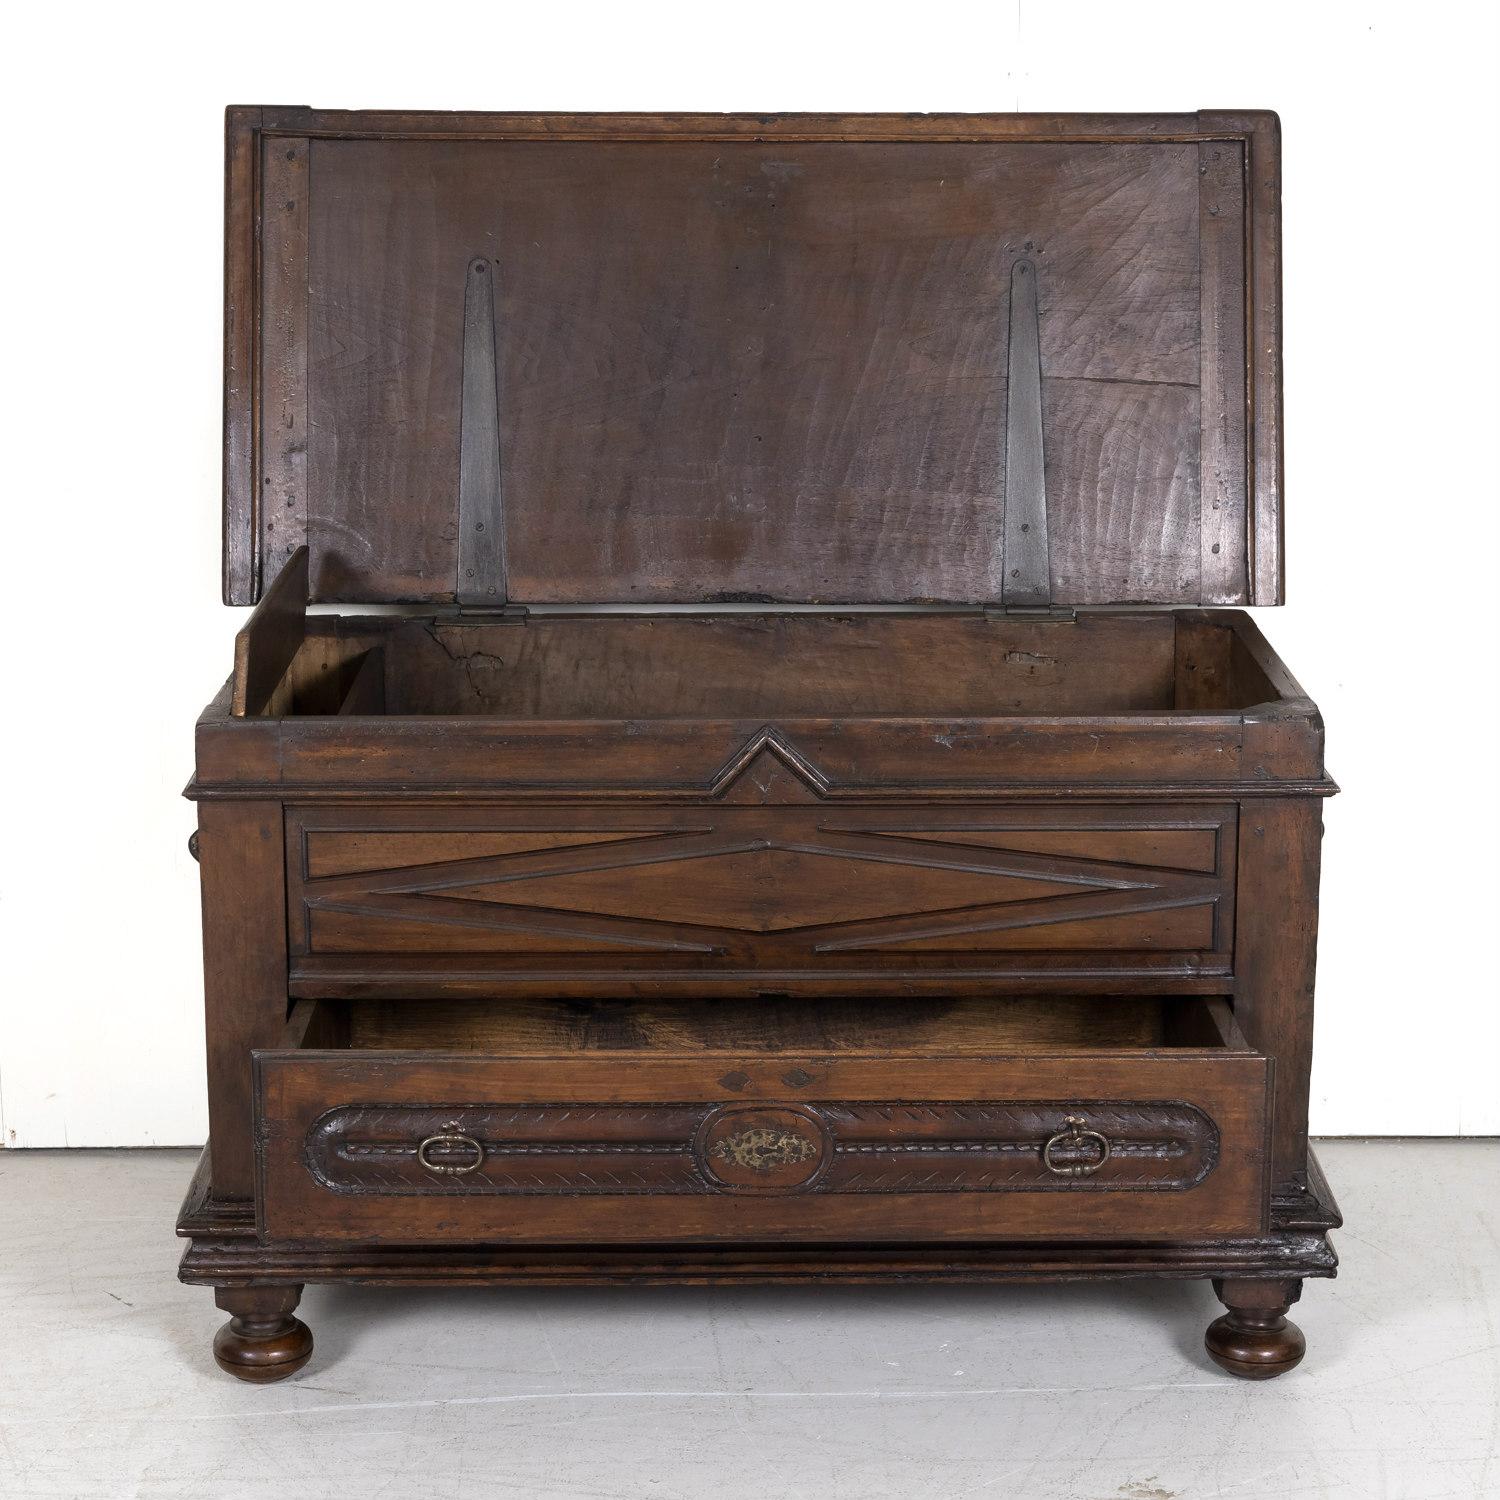 Early 18th Century Louis XIII Style Solid Walnut Coffer or Trunk with Drawer For Sale 1